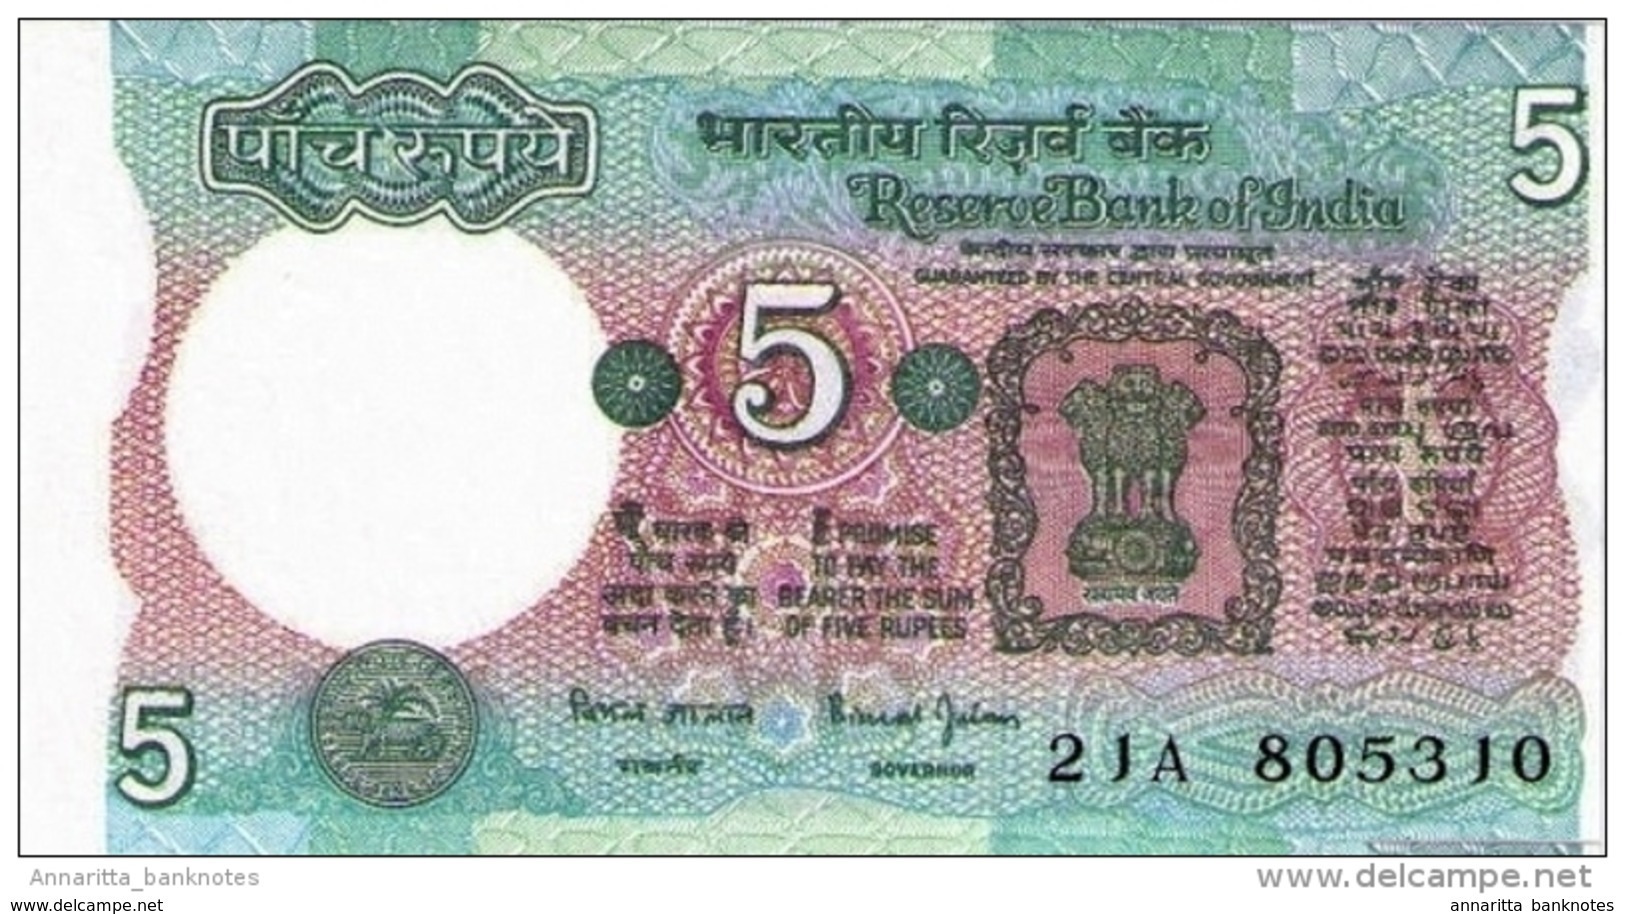 INDIA 5 RUPEES ND (2001) P-80s UNC SIGN. BIMAL JALAN [IN260a] - India